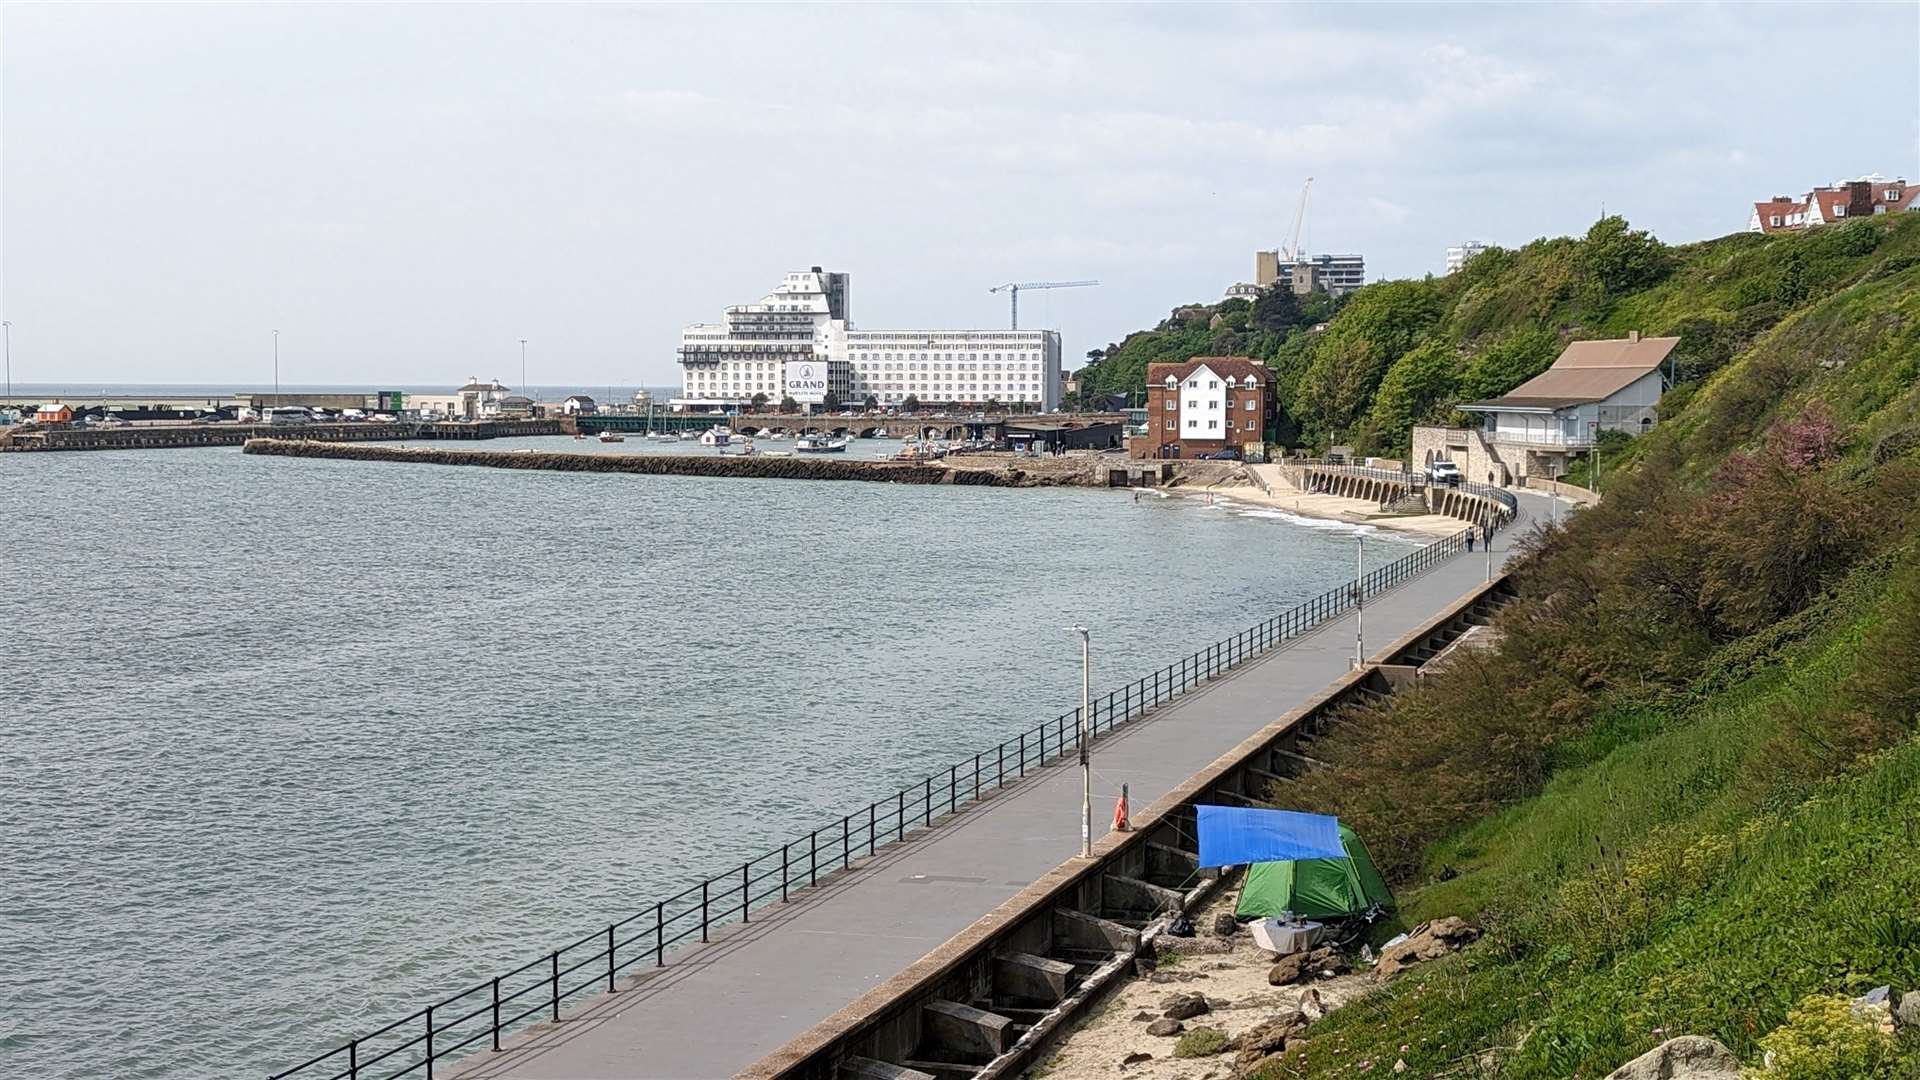 Looking back on Folkestone Harbour on the climb up towards the East Cliff